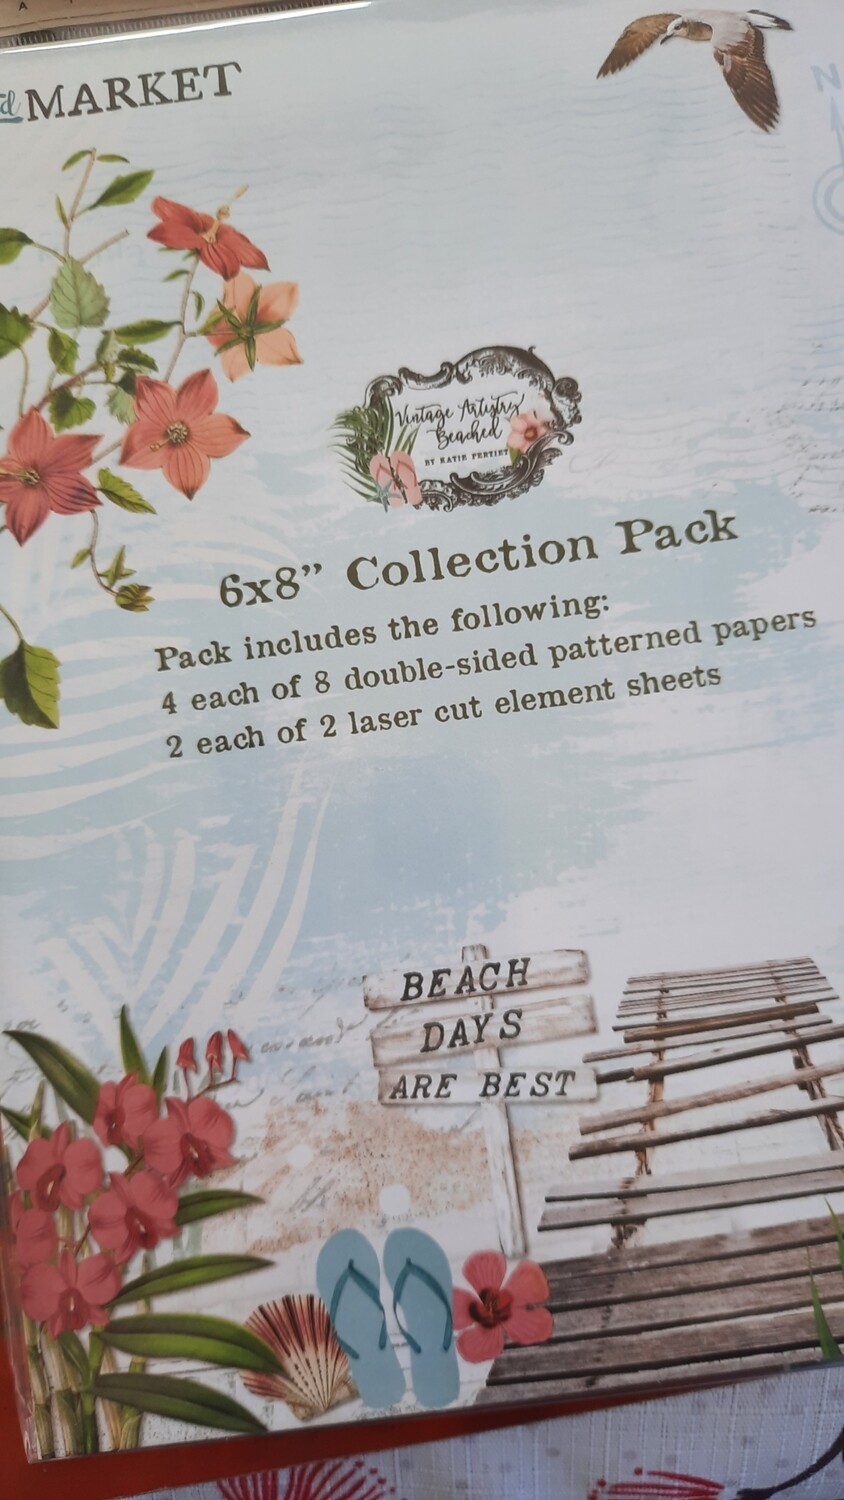 49 and Market Vintage Artistry Beached 6x8 collection pack